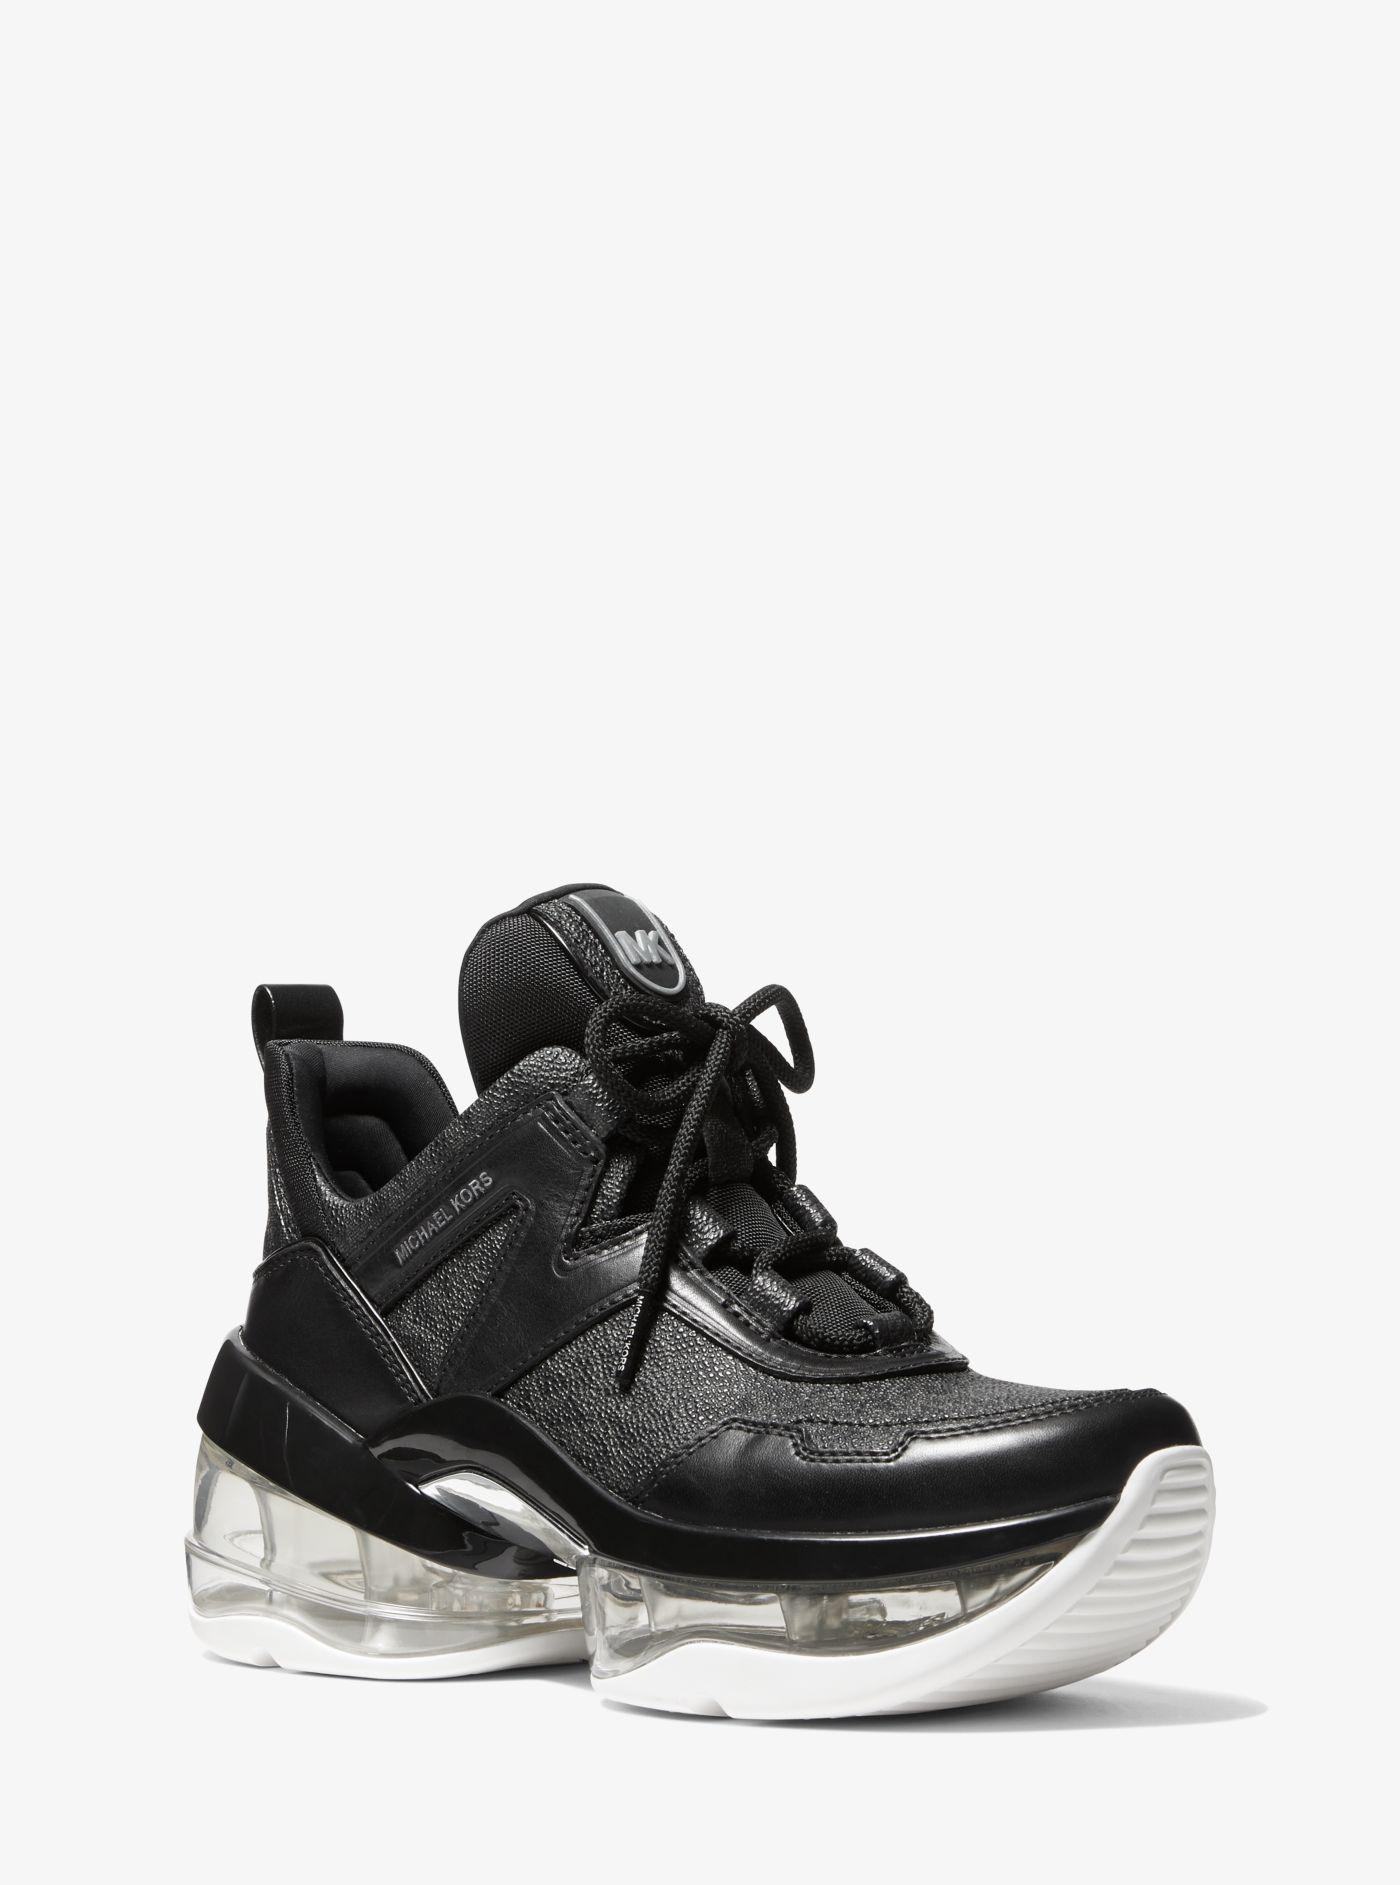 Michael Kors Olympia Extreme Logo And Leather Trainer in Black | Lyst